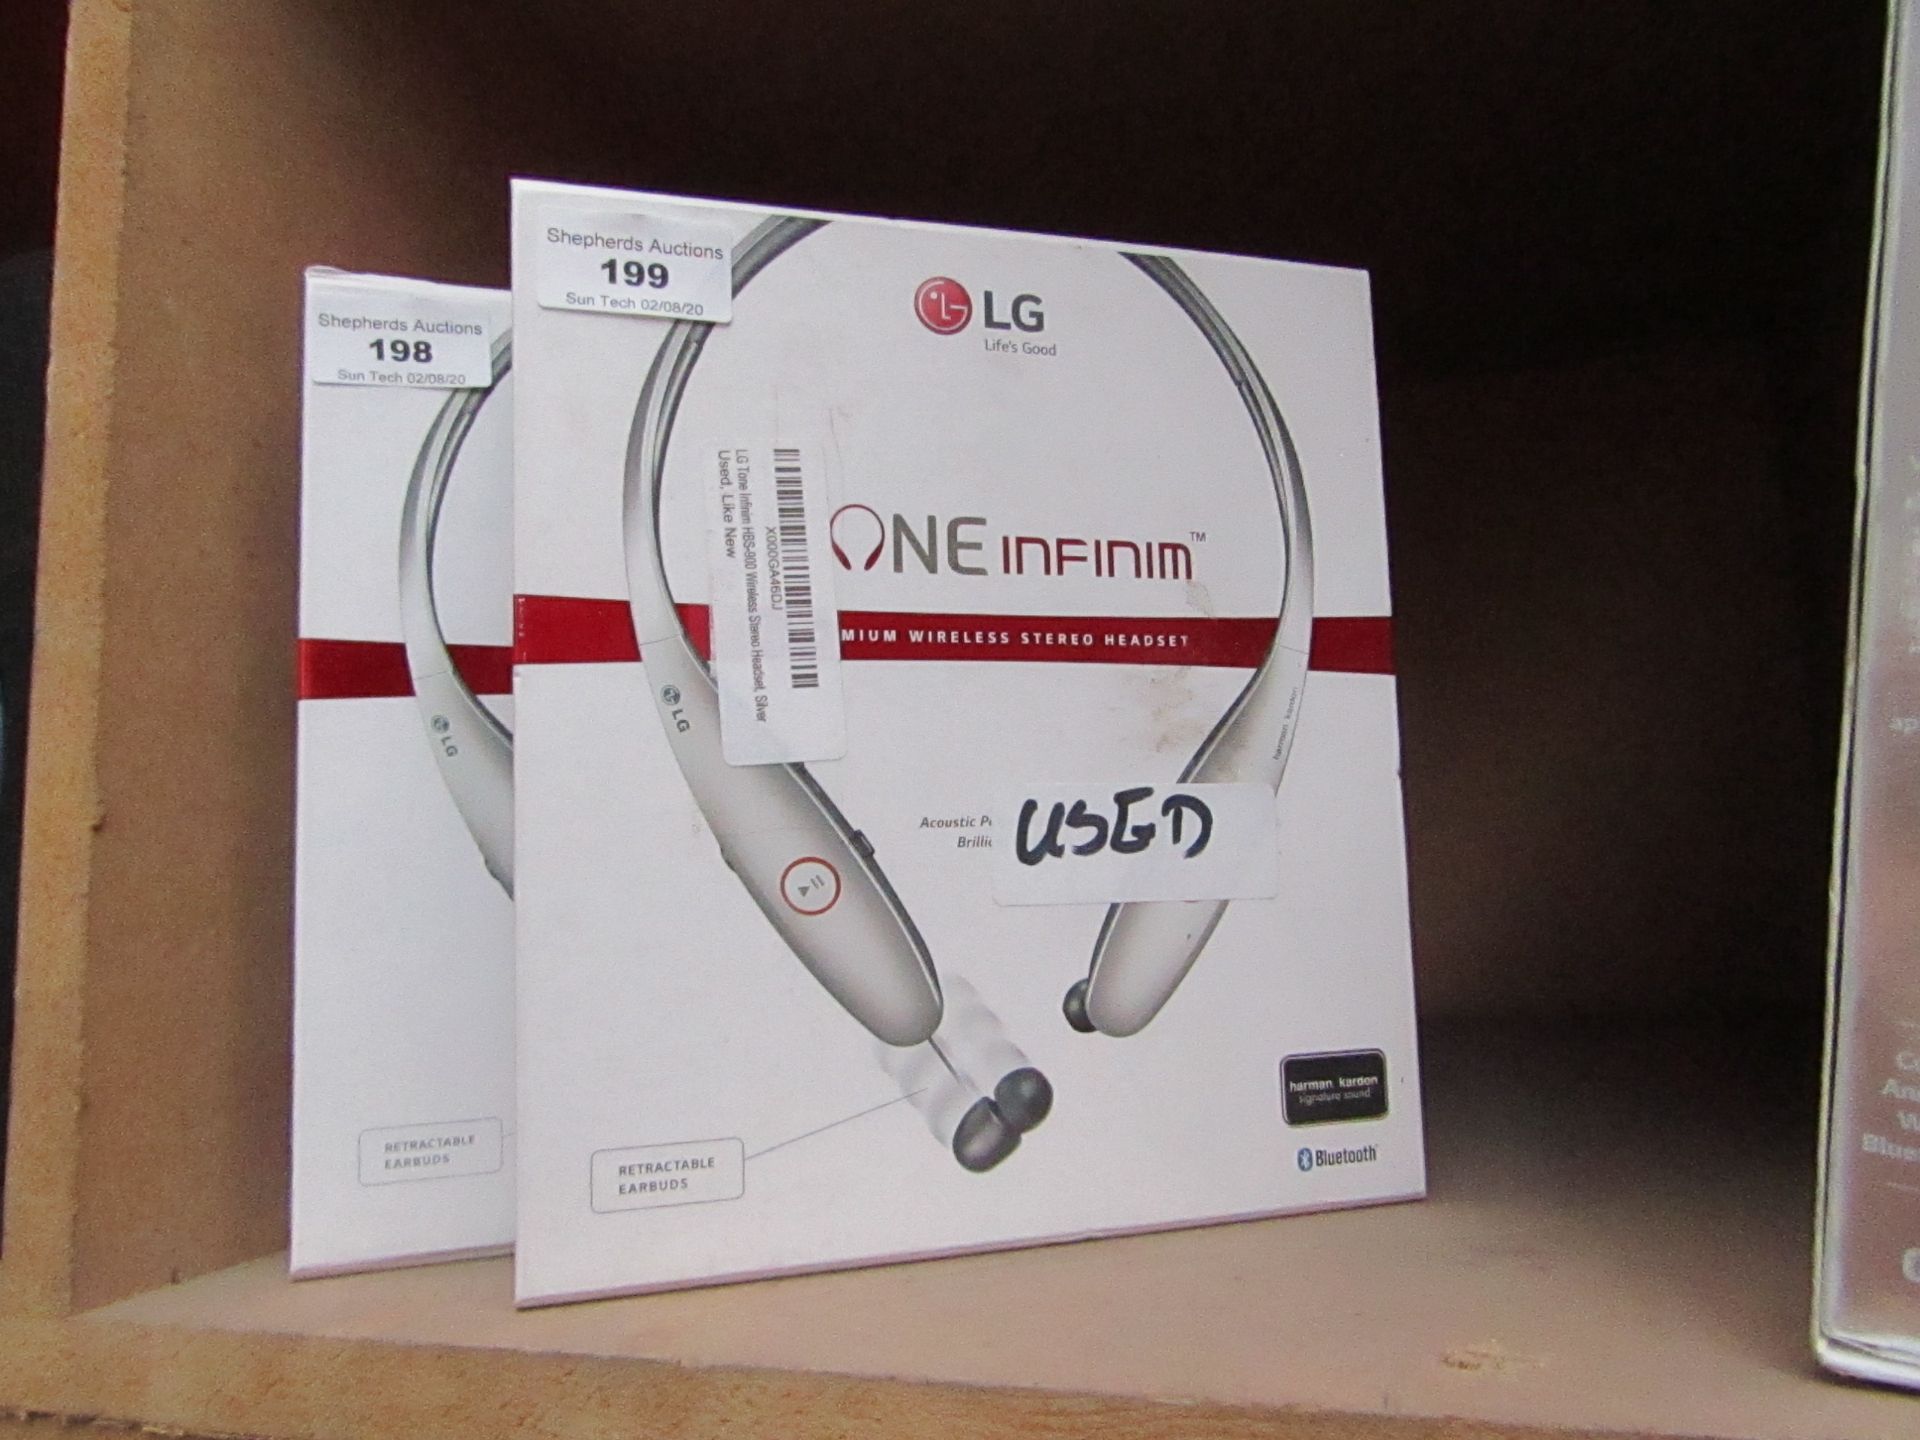 LG One Infinim earphones, untested and boxed. RRP £116.98